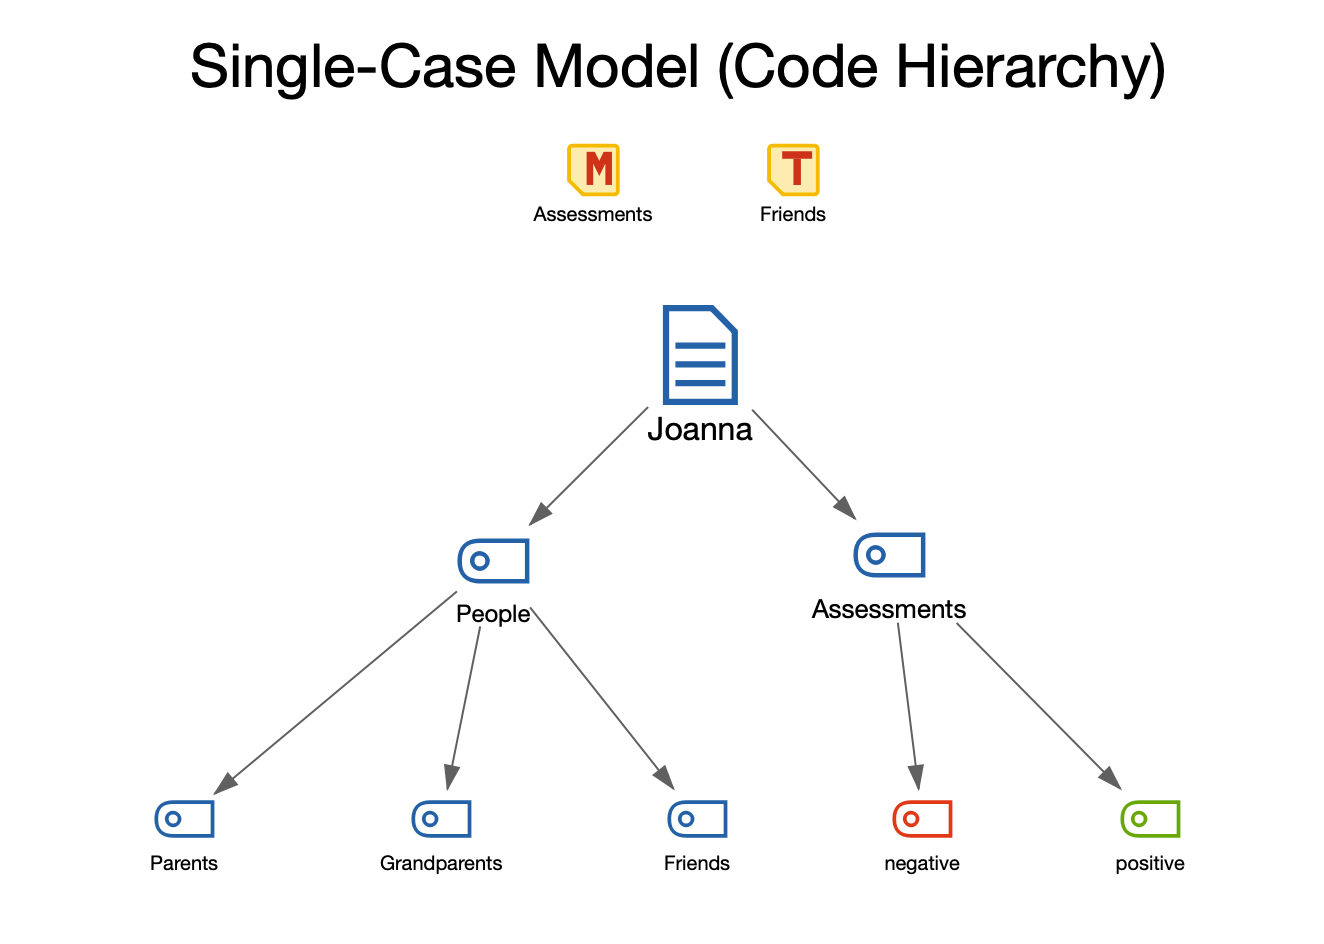 Example of a Single-Case Model with code hierarchy